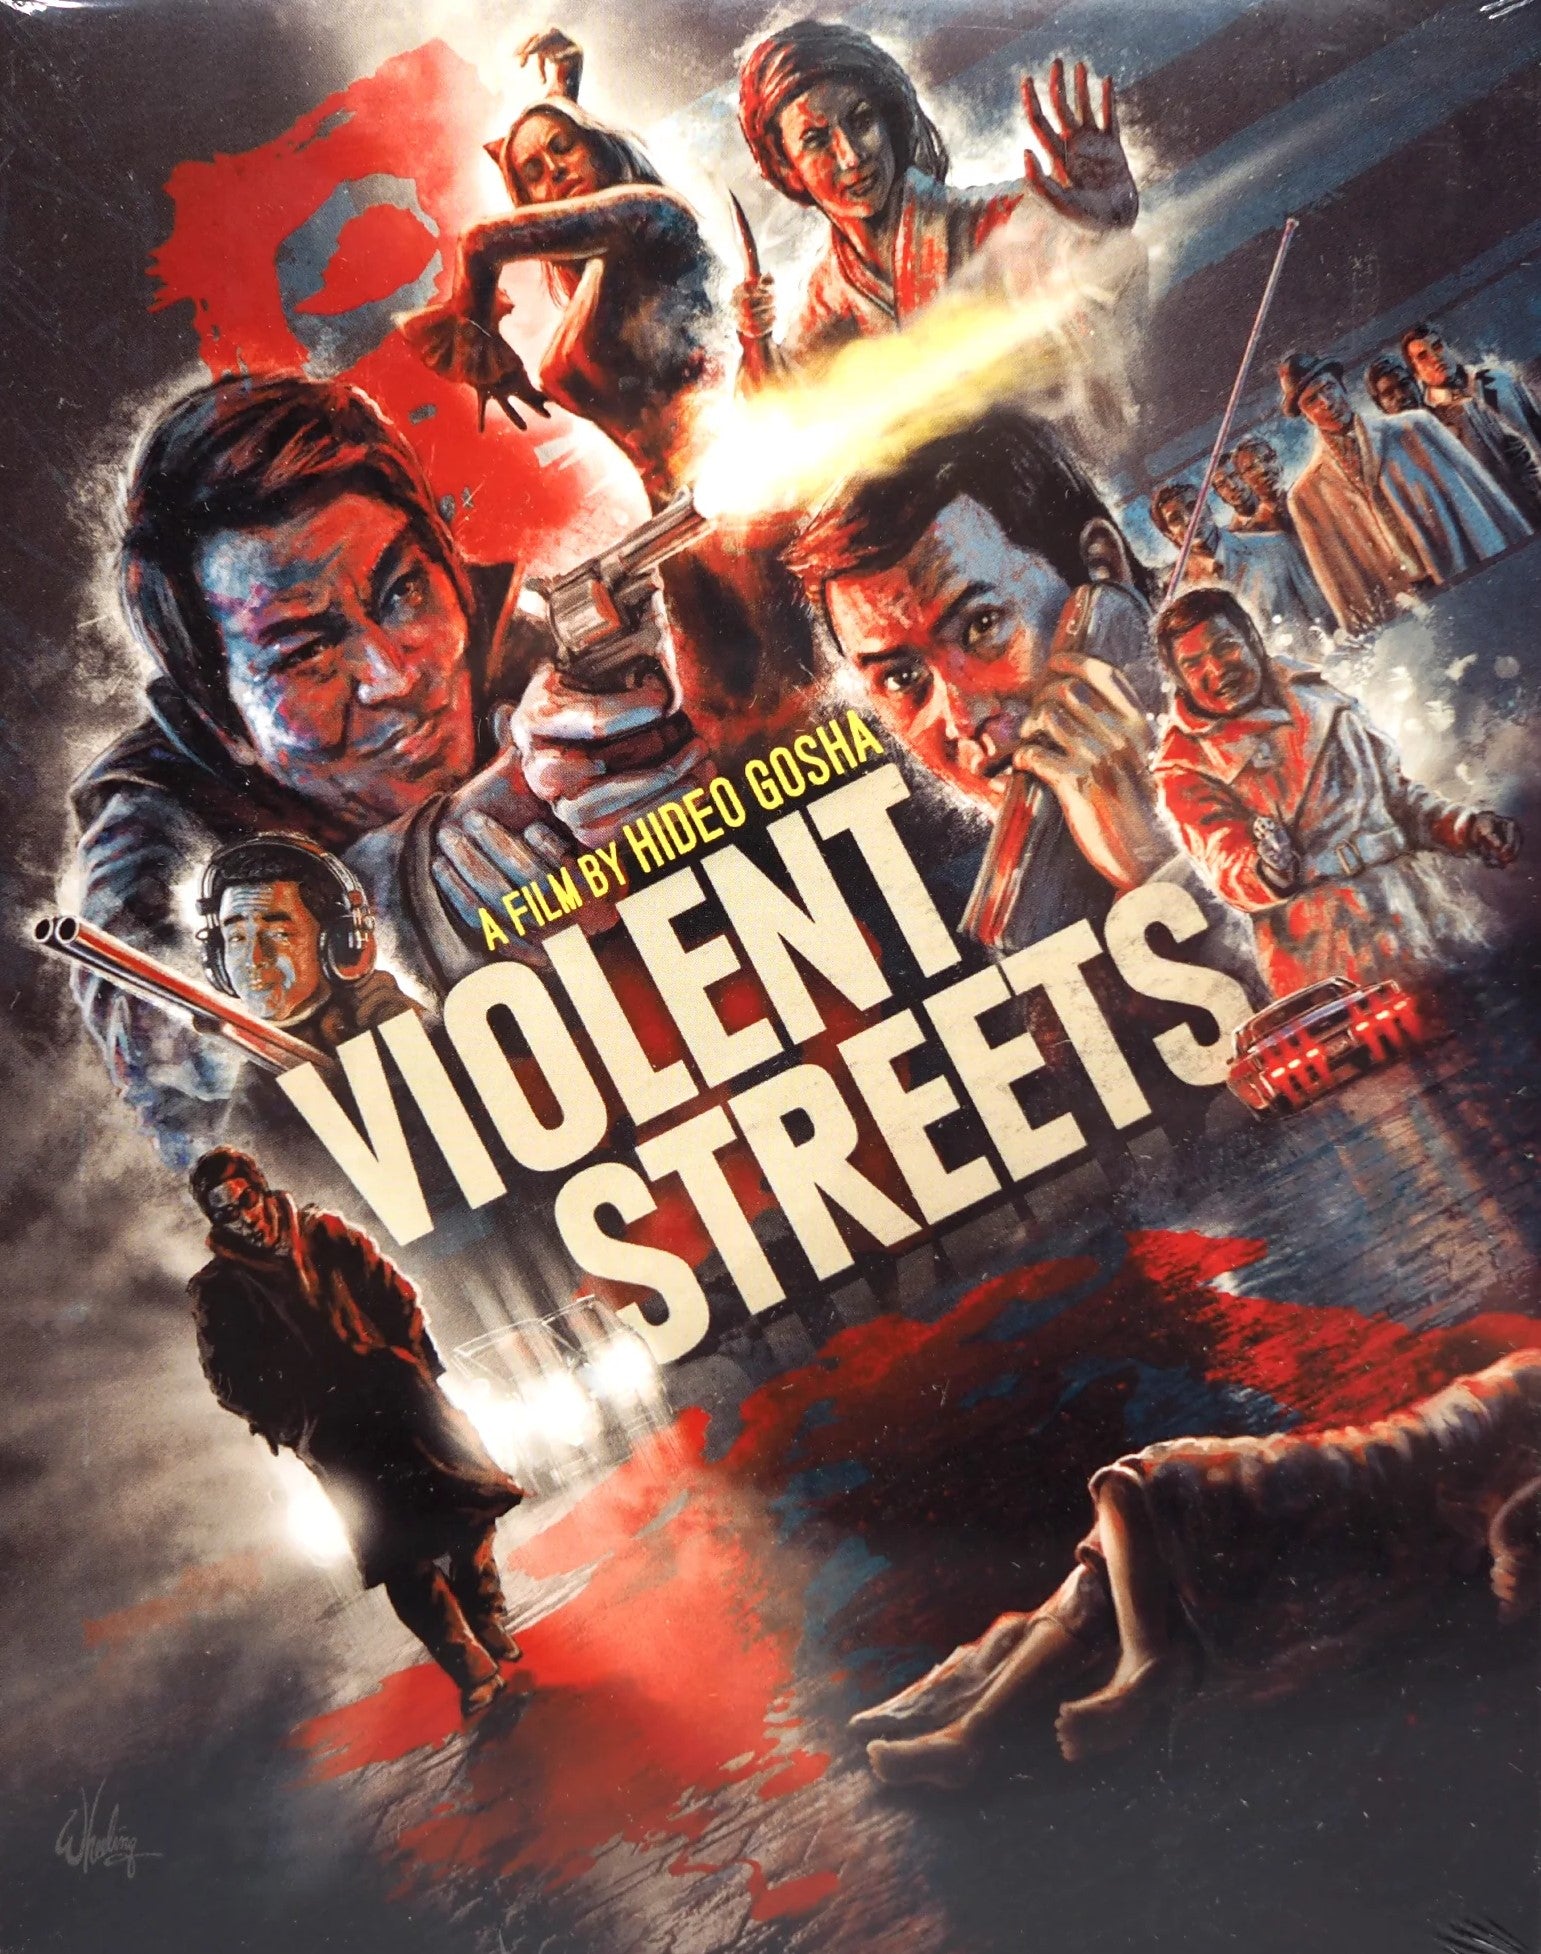 VIOLENT STREETS (LIMITED EDITION) BLU-RAY